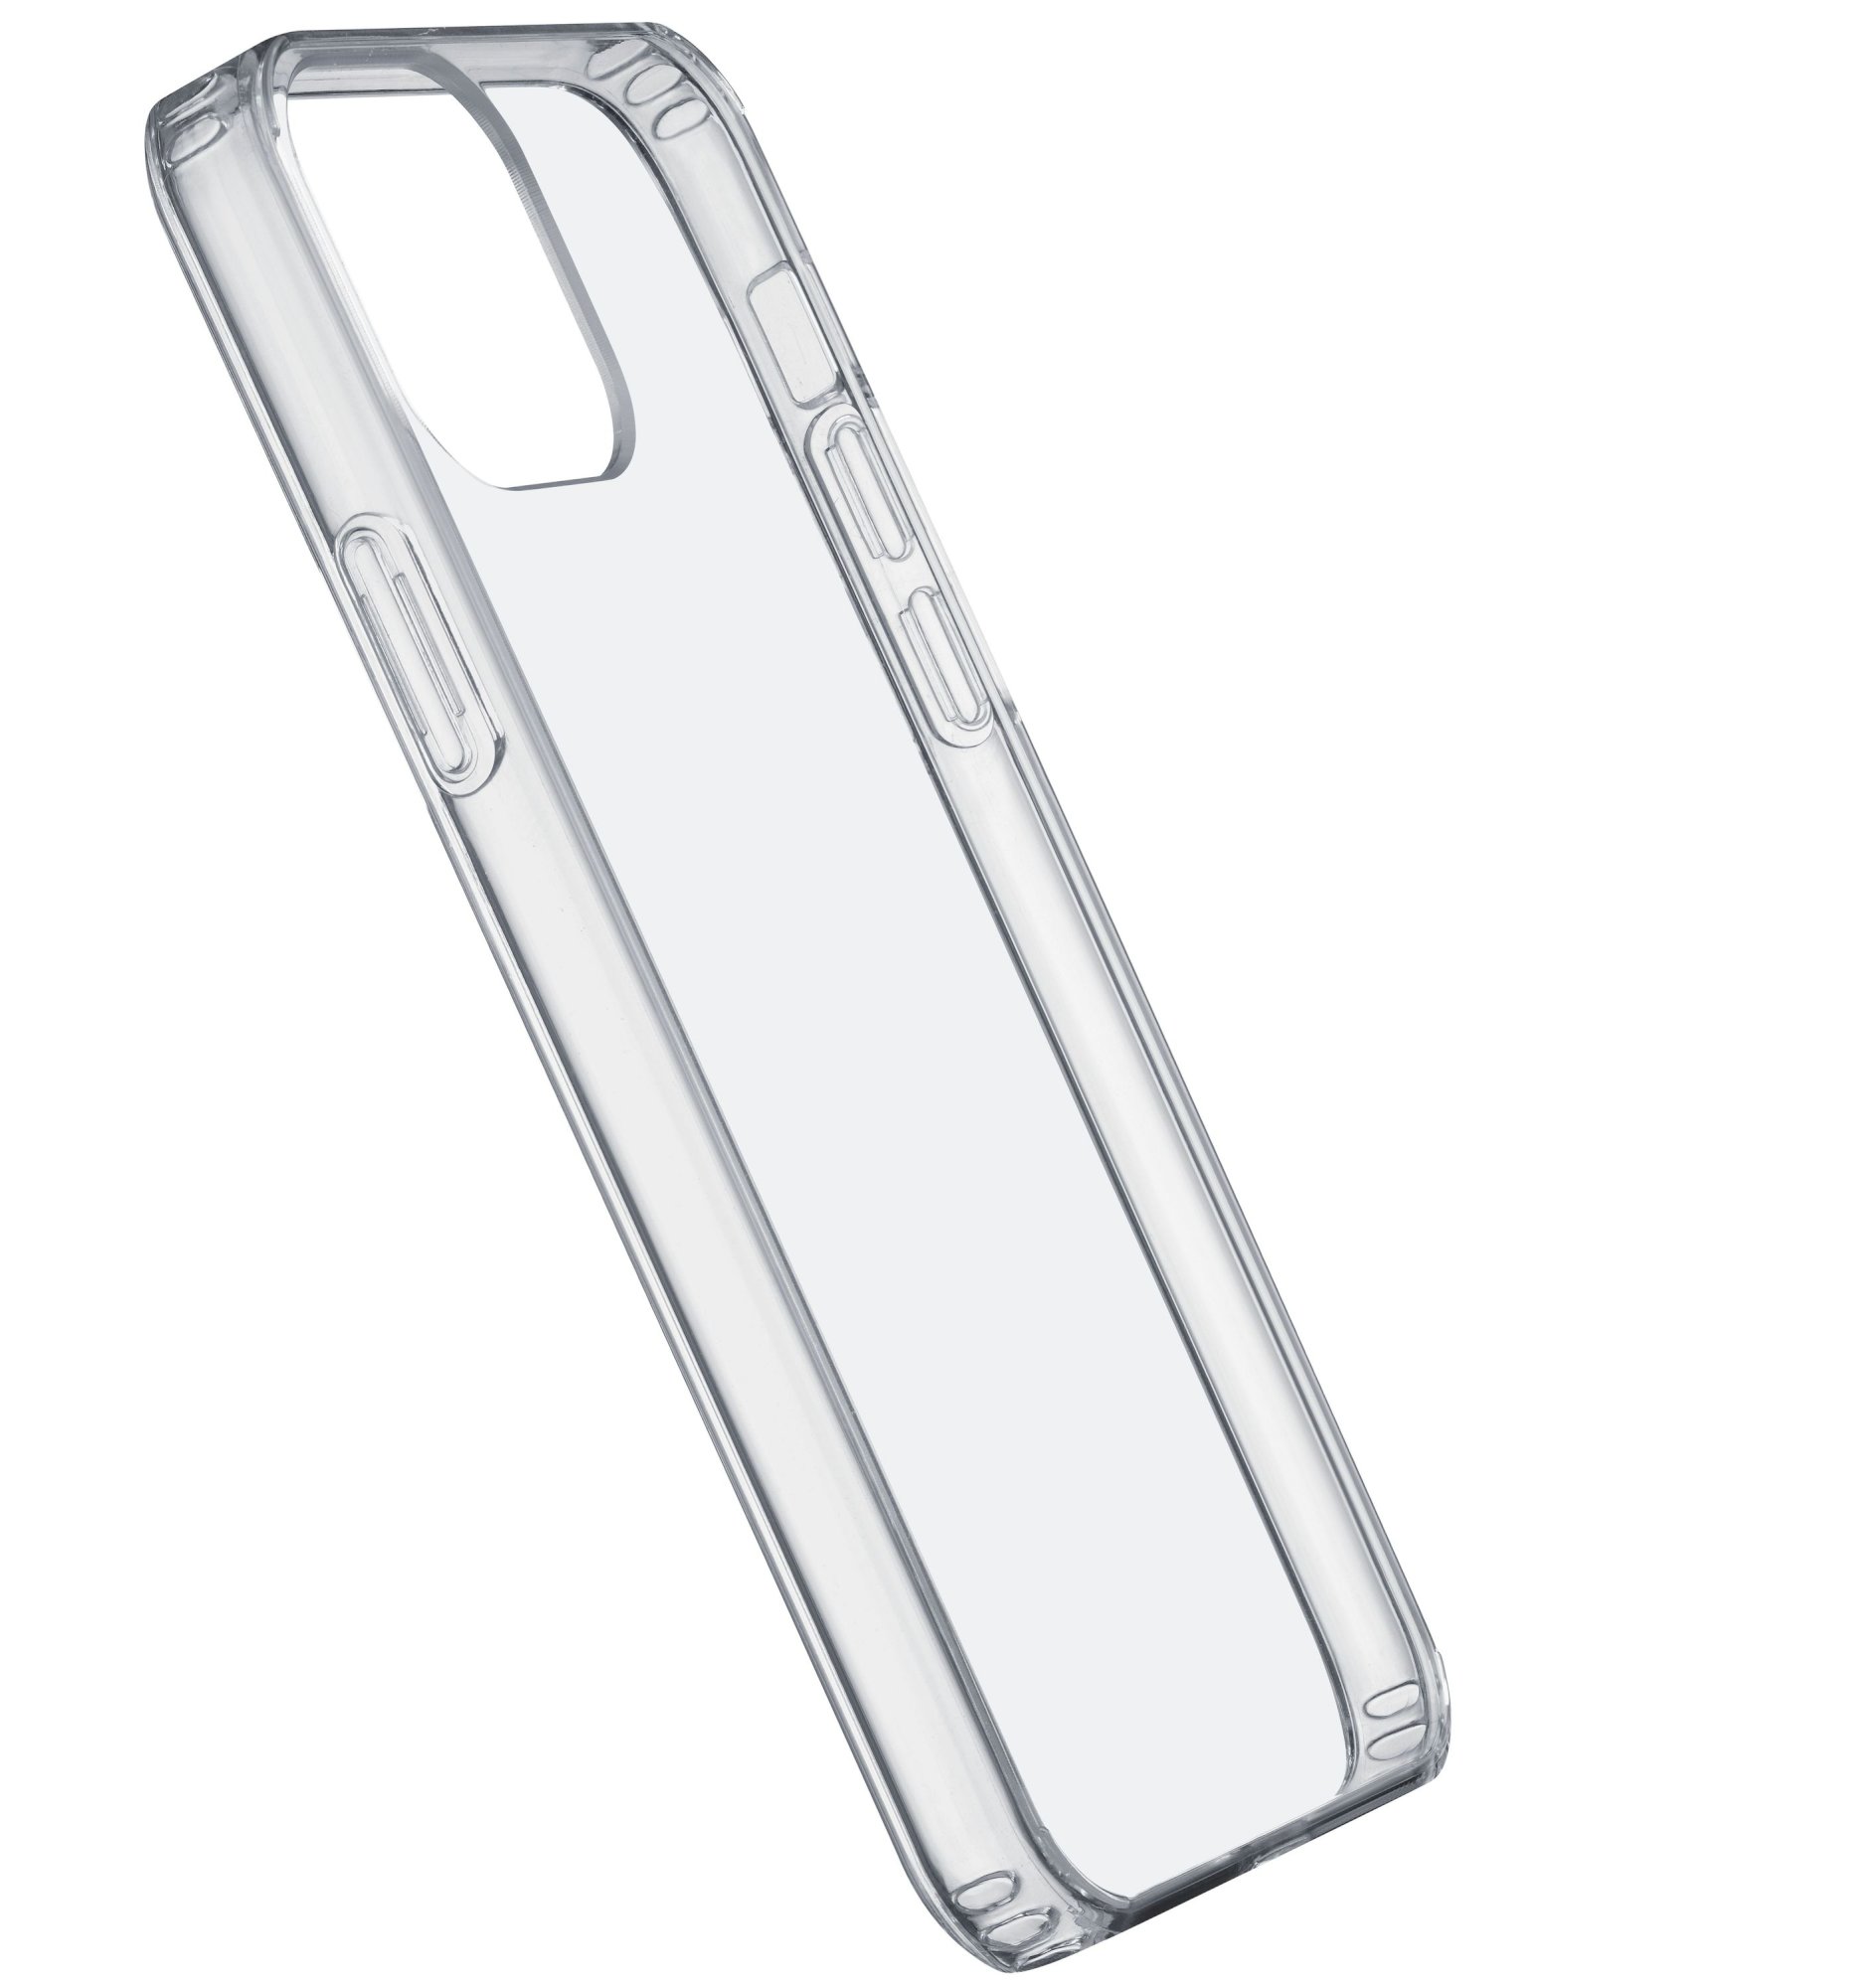 iPhone 12 Pro Max, case clear duo, transparent